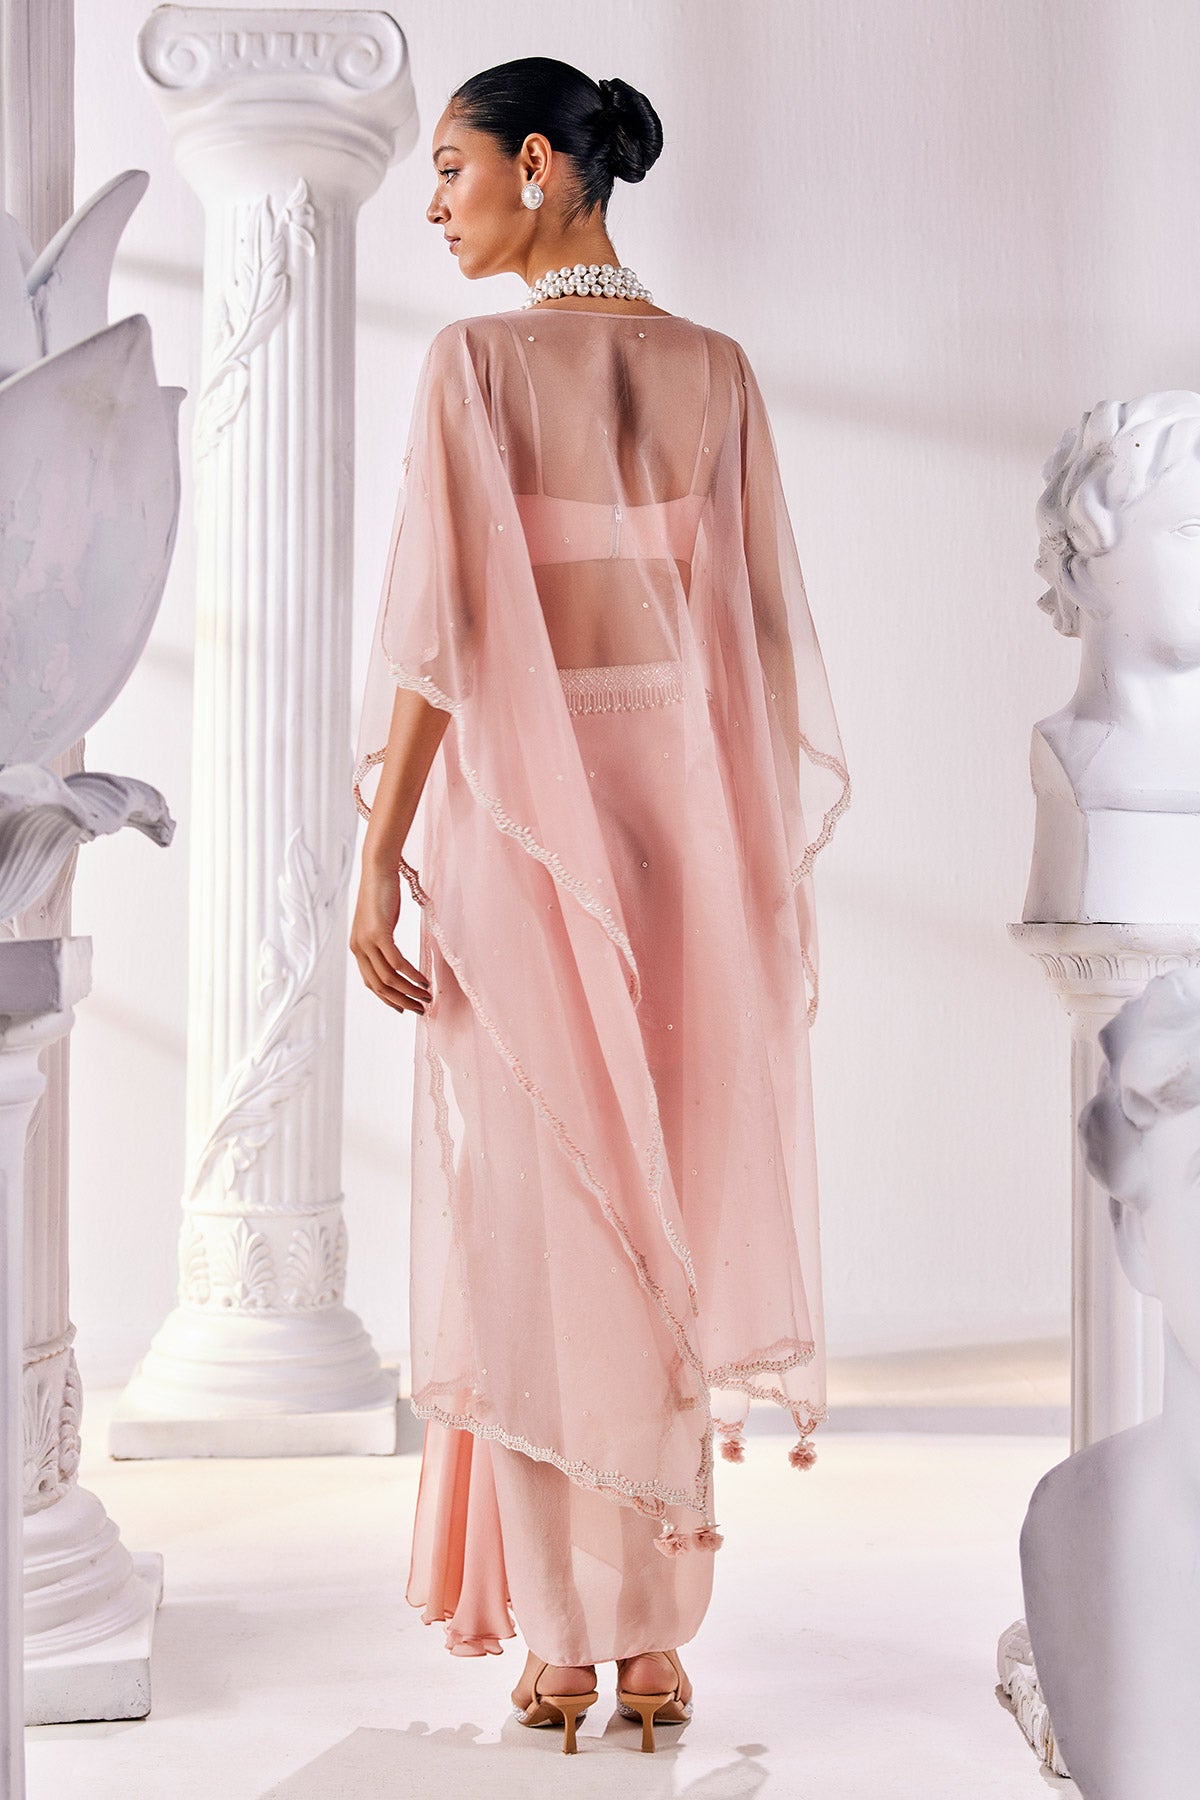 Peach Draped Skirt In Satin Georgette Paired With A Belt And A Pearl Detailed Blouse With A Soft Organza Cape.